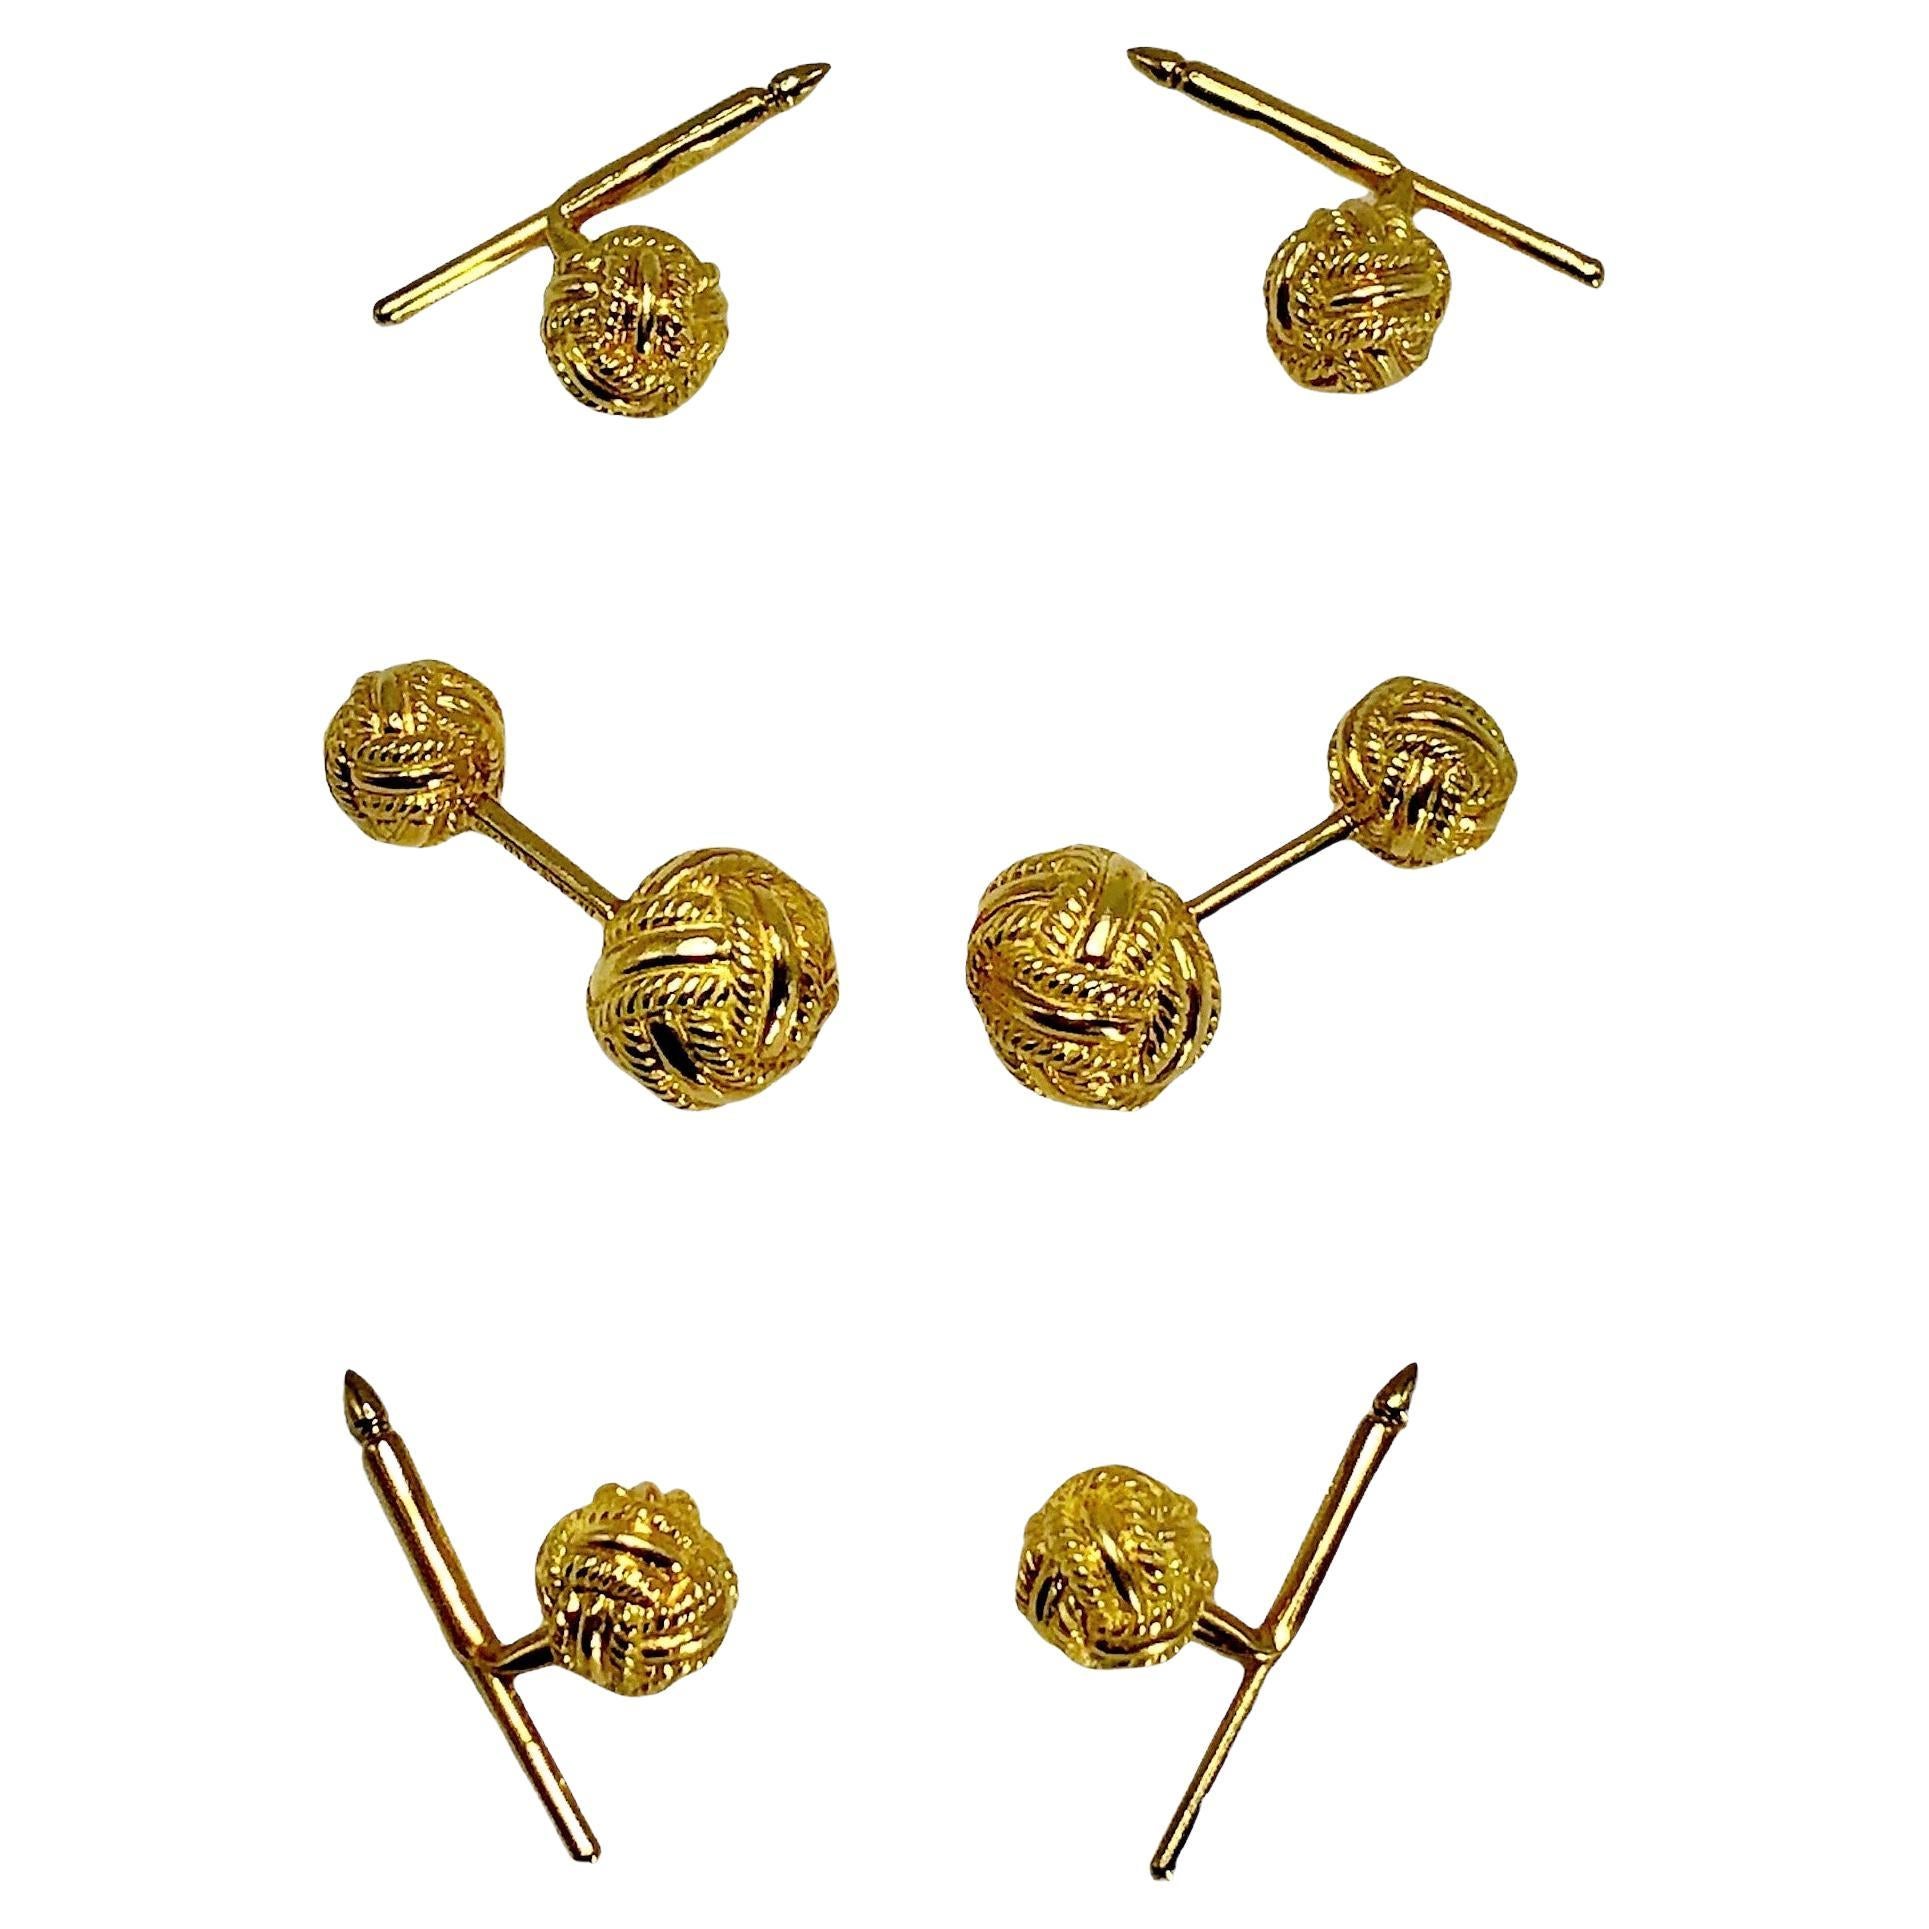 Fashioned from 18k yellow gold in the form of round woven knots, this four button dress set is an iconic model of Tiffany Schlumberger. Each large knot measures a full 1/2 inch in diameter and all small knots have diameters of 1/3 inches.  The cuff